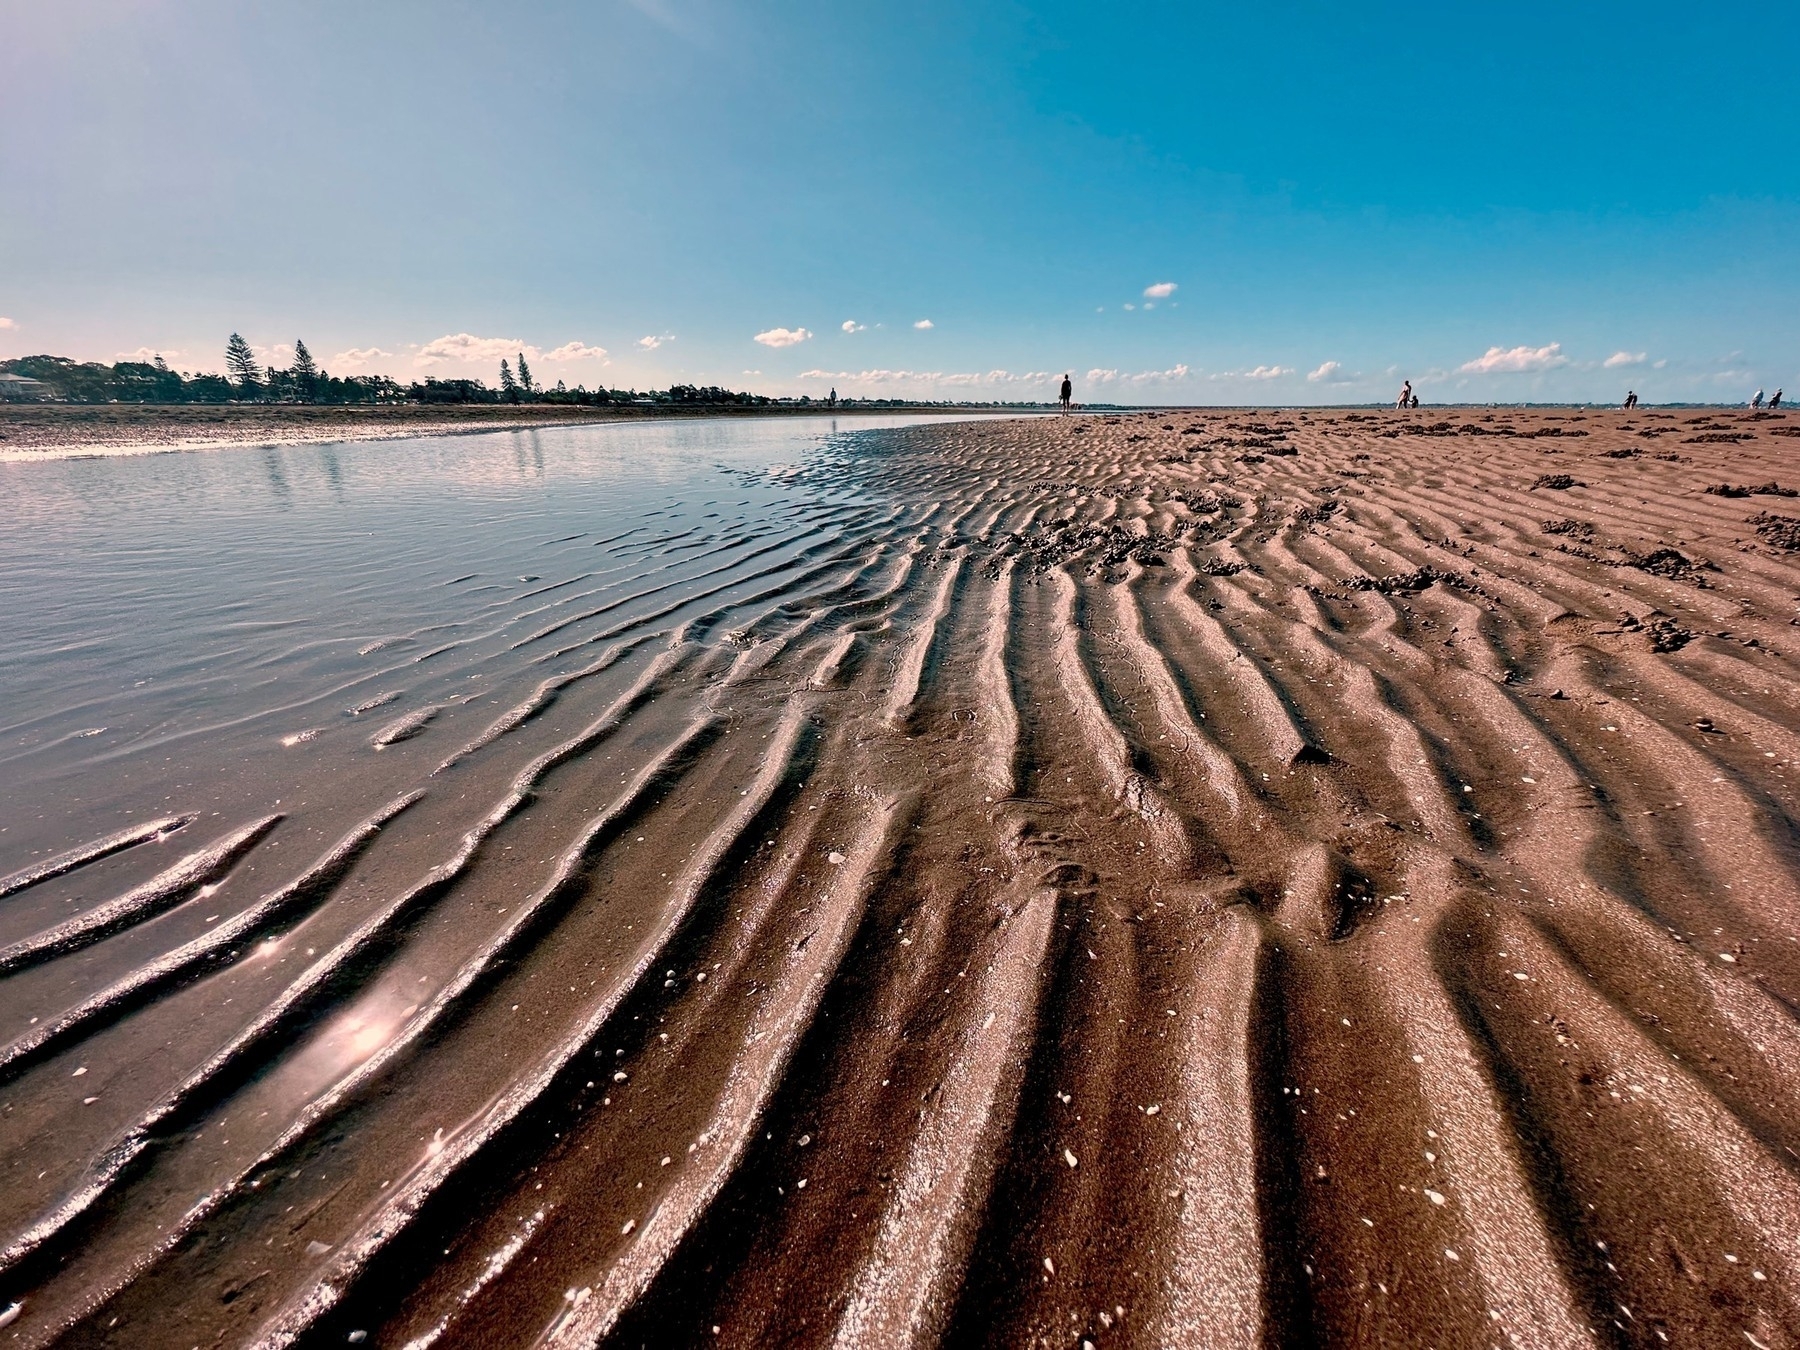 Looking along a beach at low tide, a bright blue sky above wavy patterns in the sand.